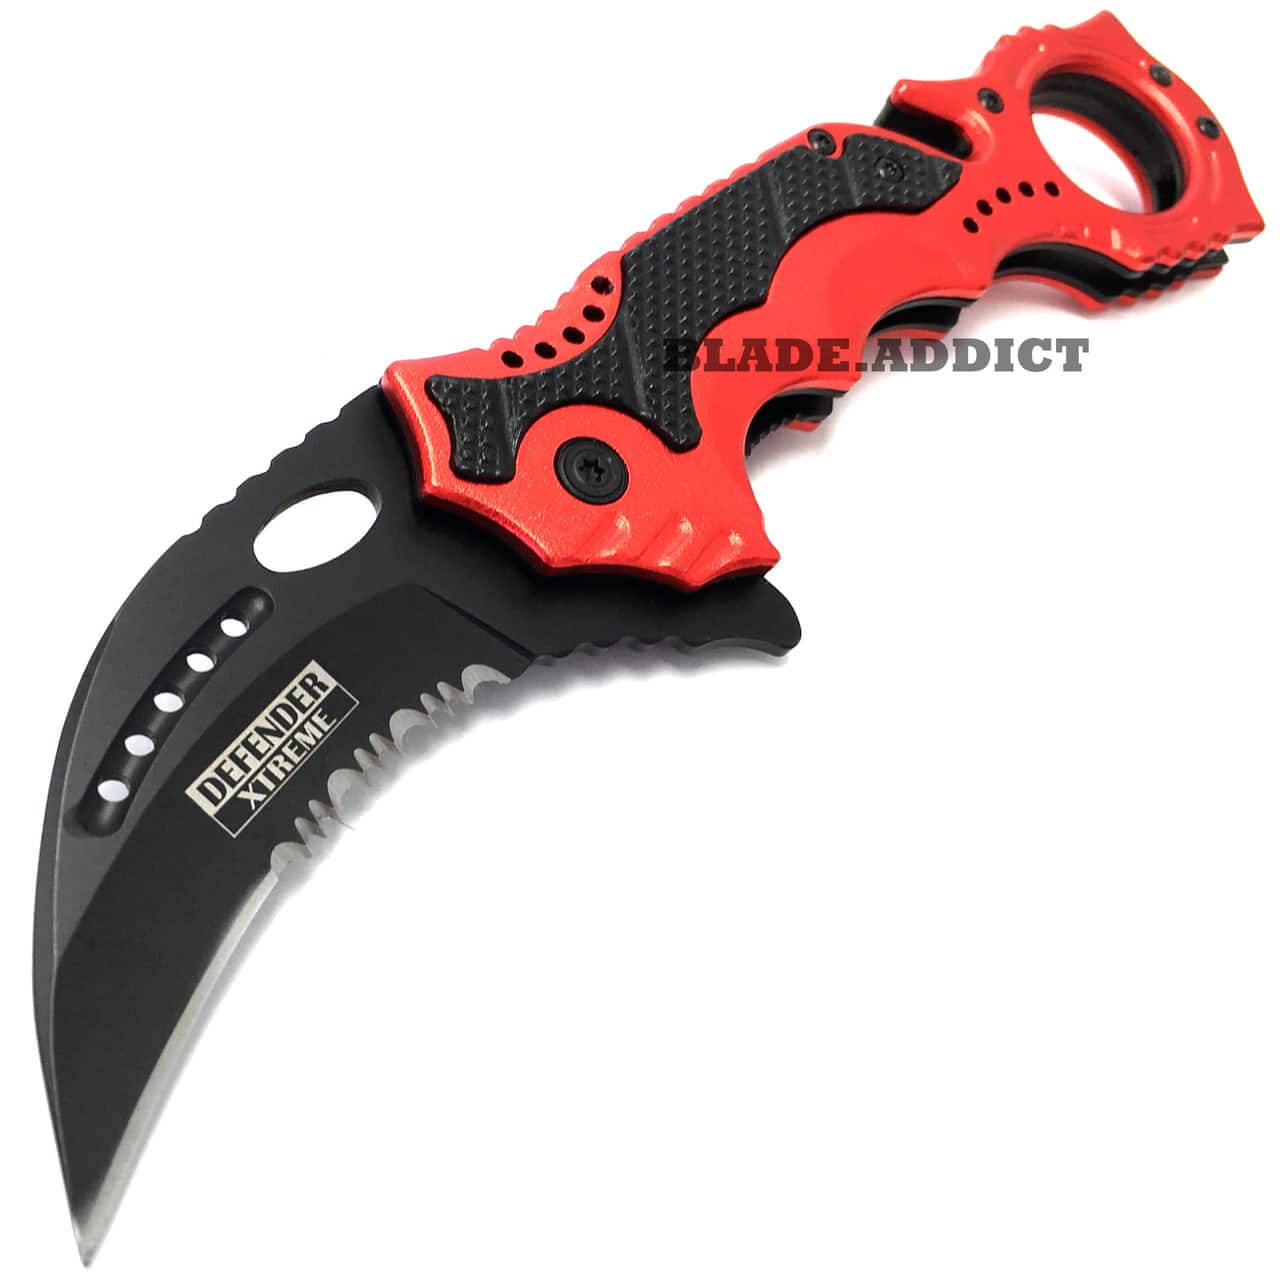 8" RED KARAMBIT Tactical Claw Spring Assisted Pocket Knife Rescue Combat EDC